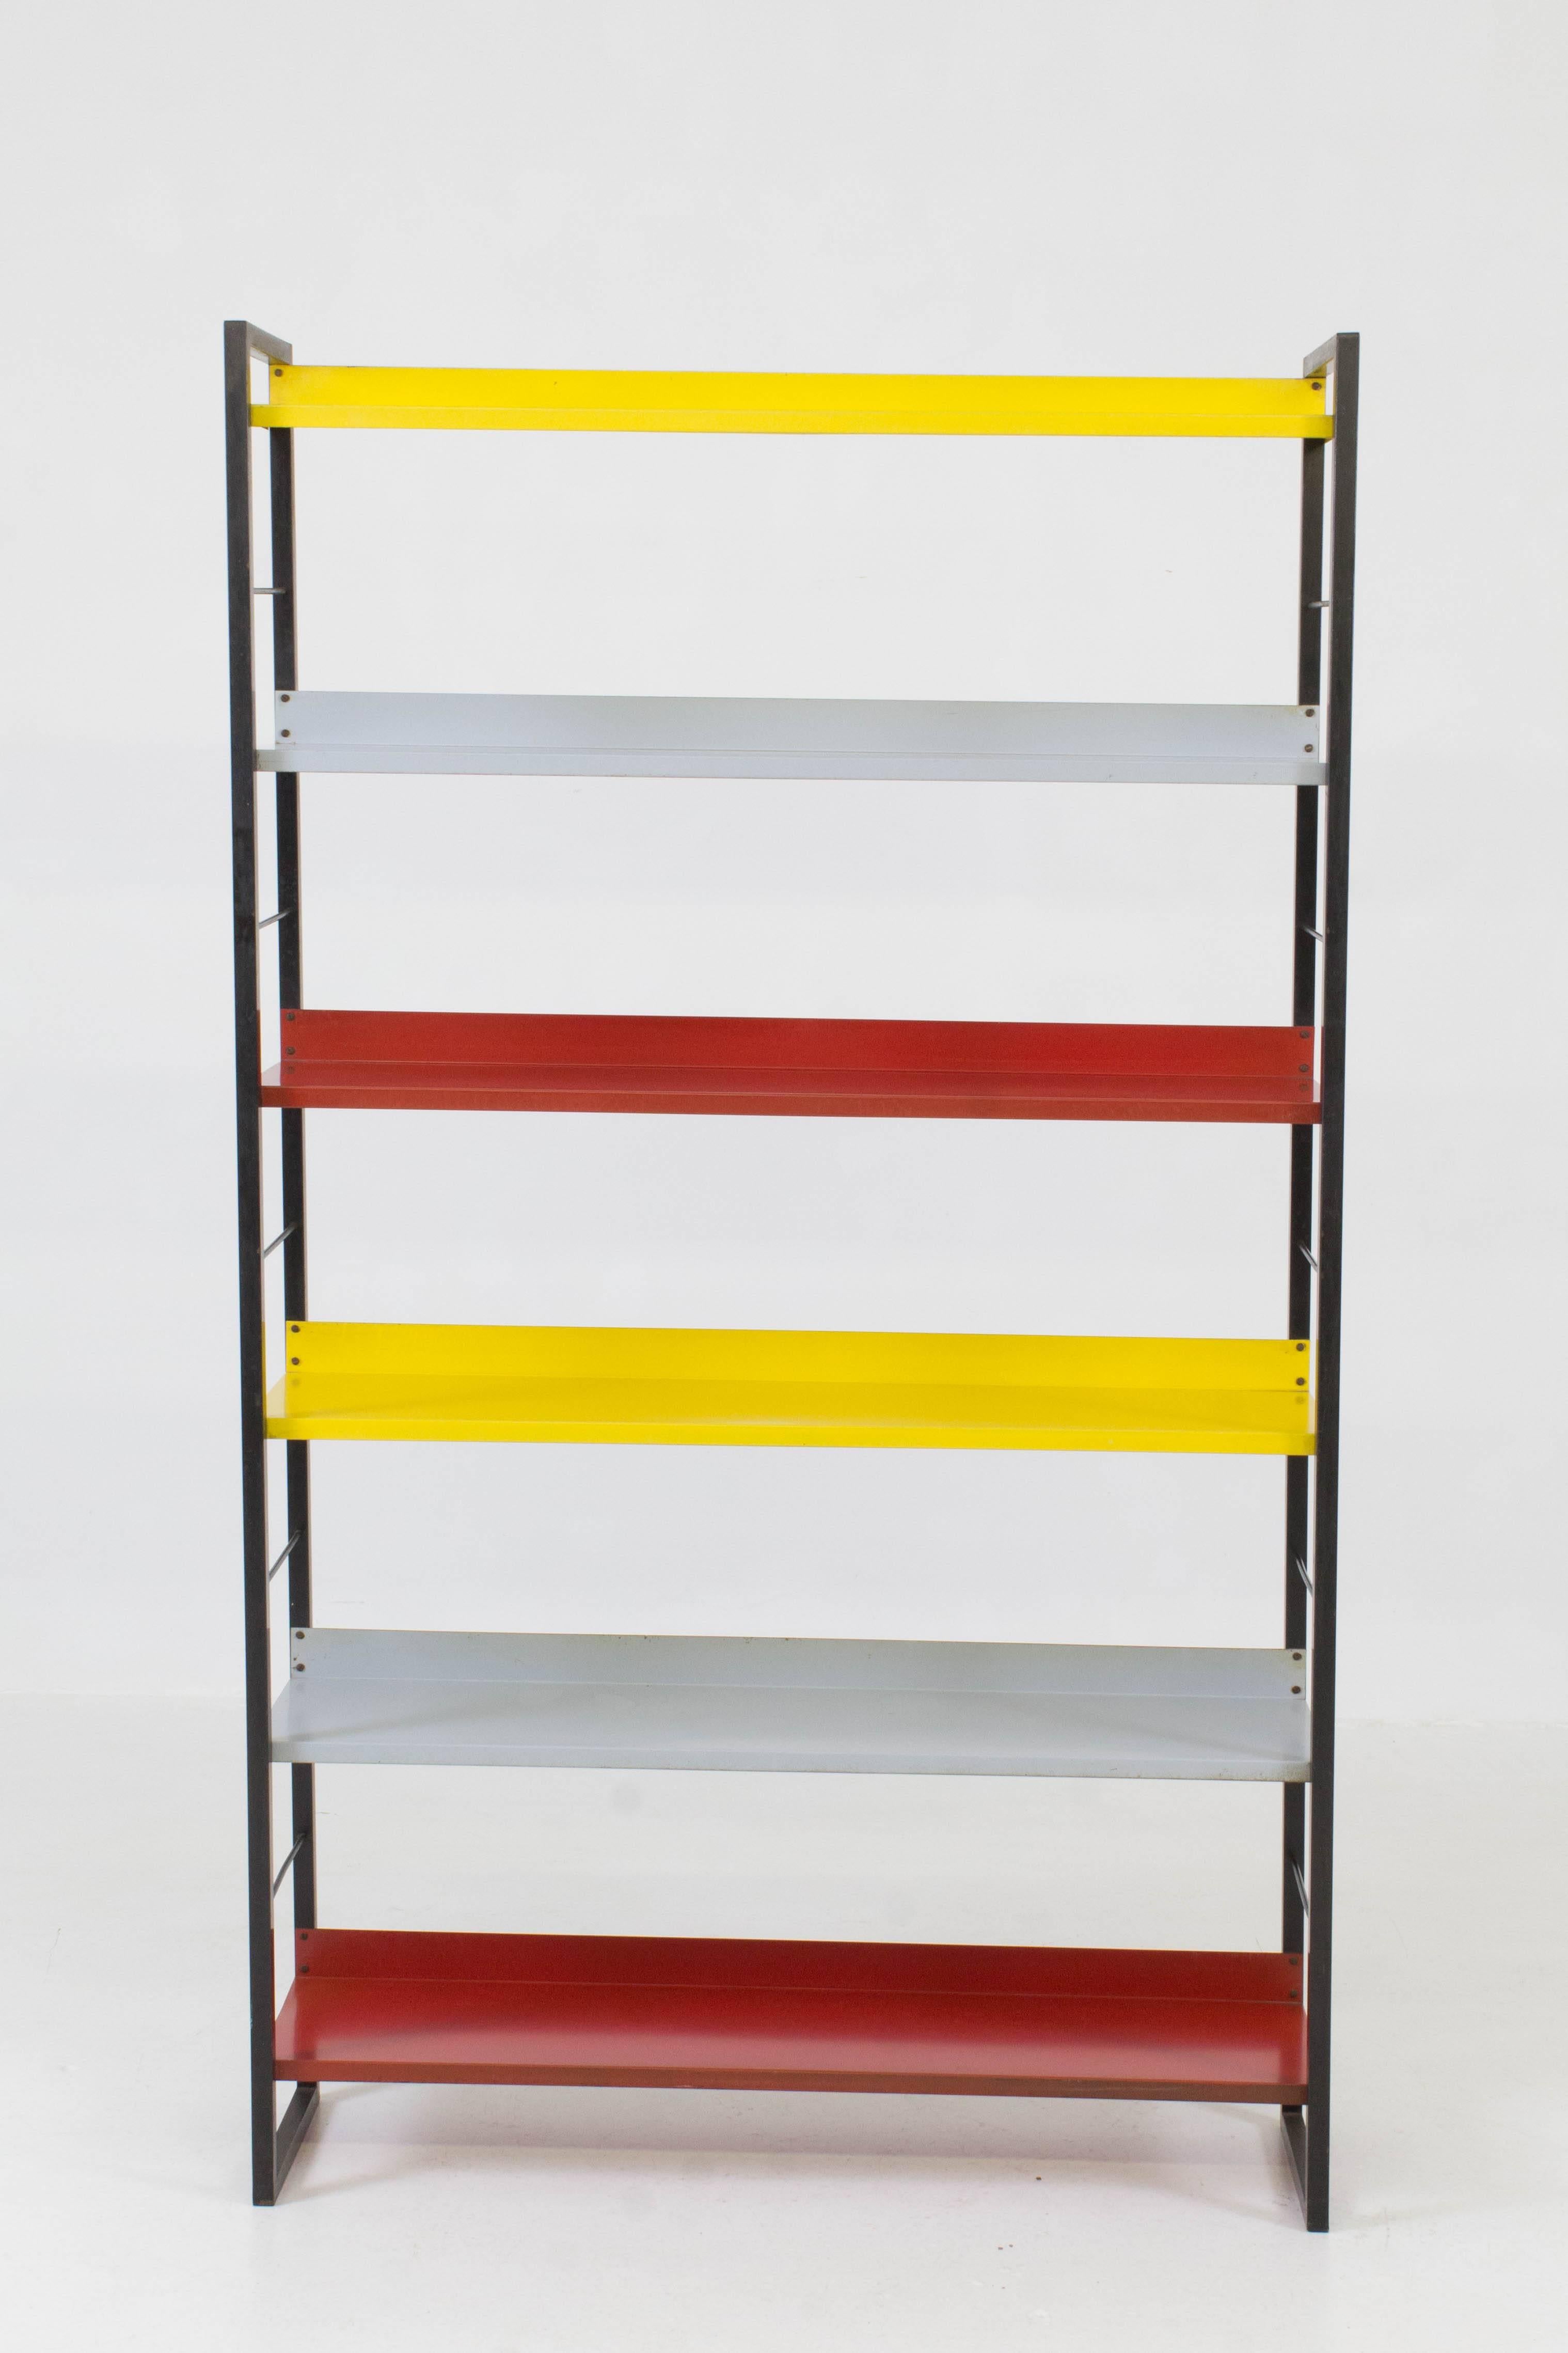 Mid-Century Modern multicolored metal standing bookshelf by Tomado, 1950s.
Black lacquered steel frame with Rietveld colored sheet metal shelves.
In good original condition with minor wear consistent with age and use,
preserving a beautiful